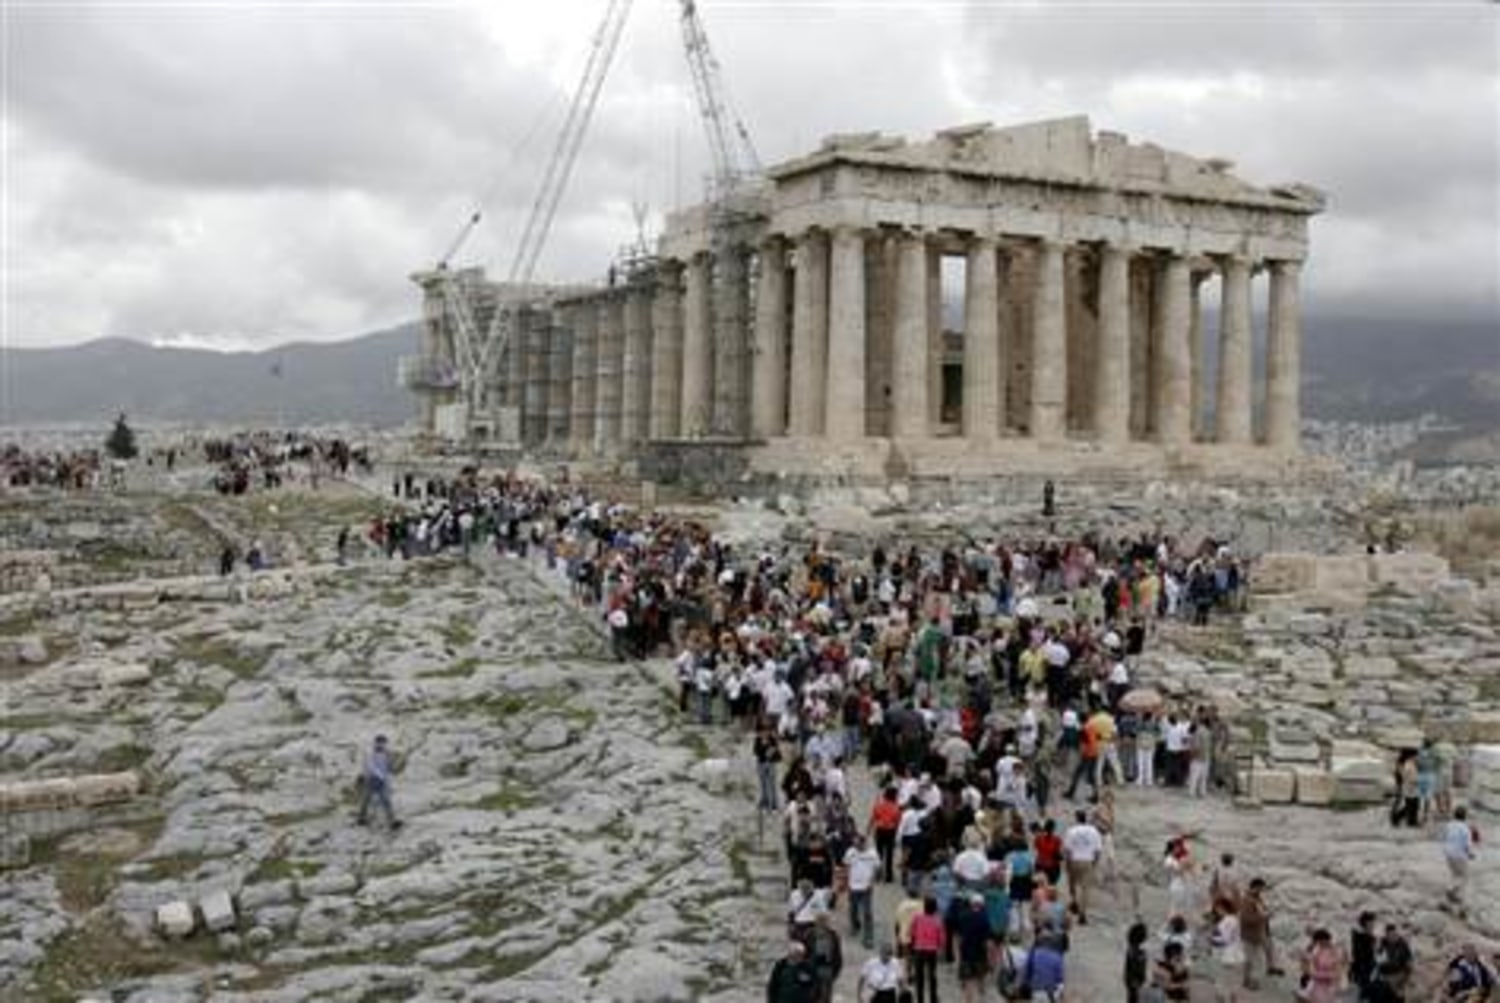 Downfall of ancient Greece blamed on 300-year drought